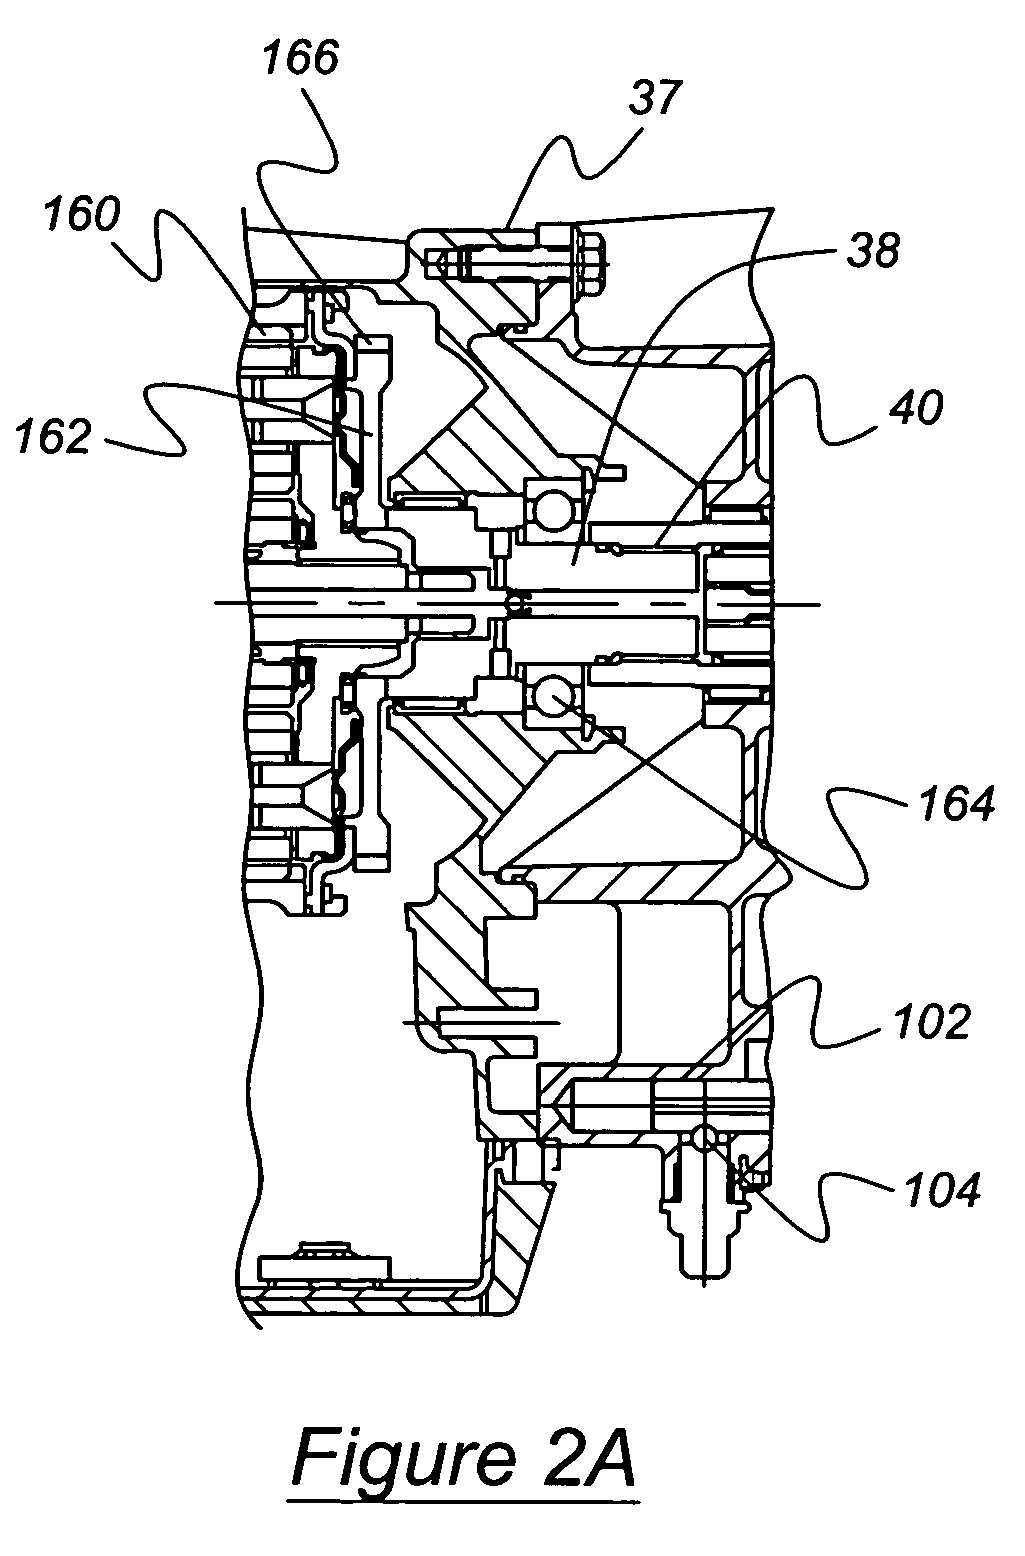 Method and apparatus for controlling a transfer case clutch to improve vehicle handling